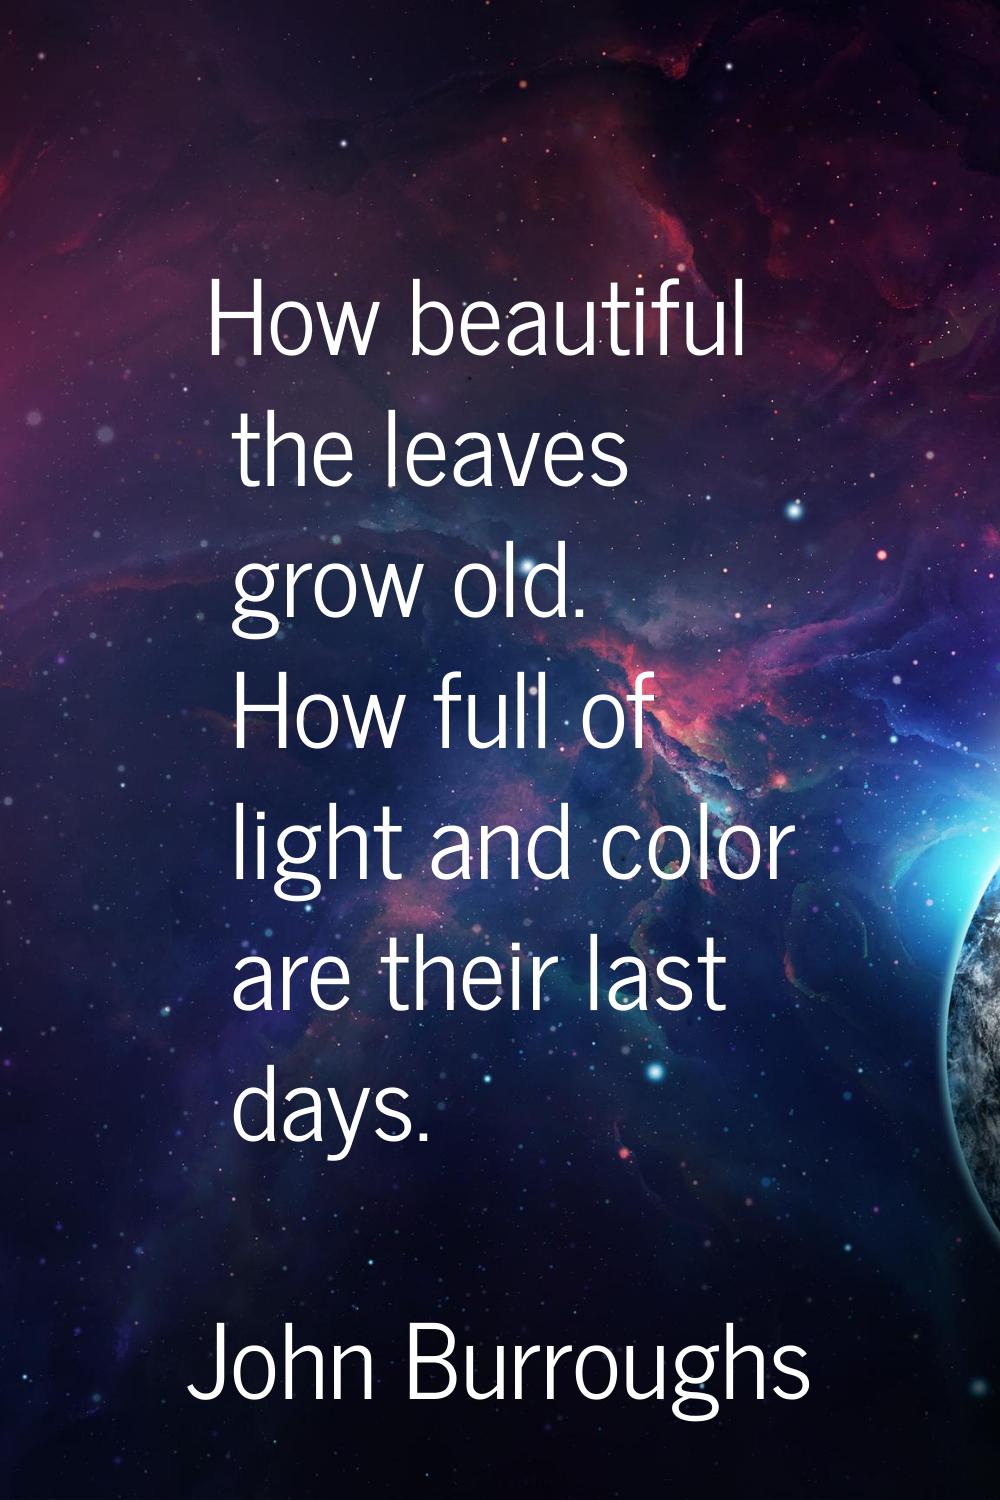 How beautiful the leaves grow old. How full of light and color are their last days.